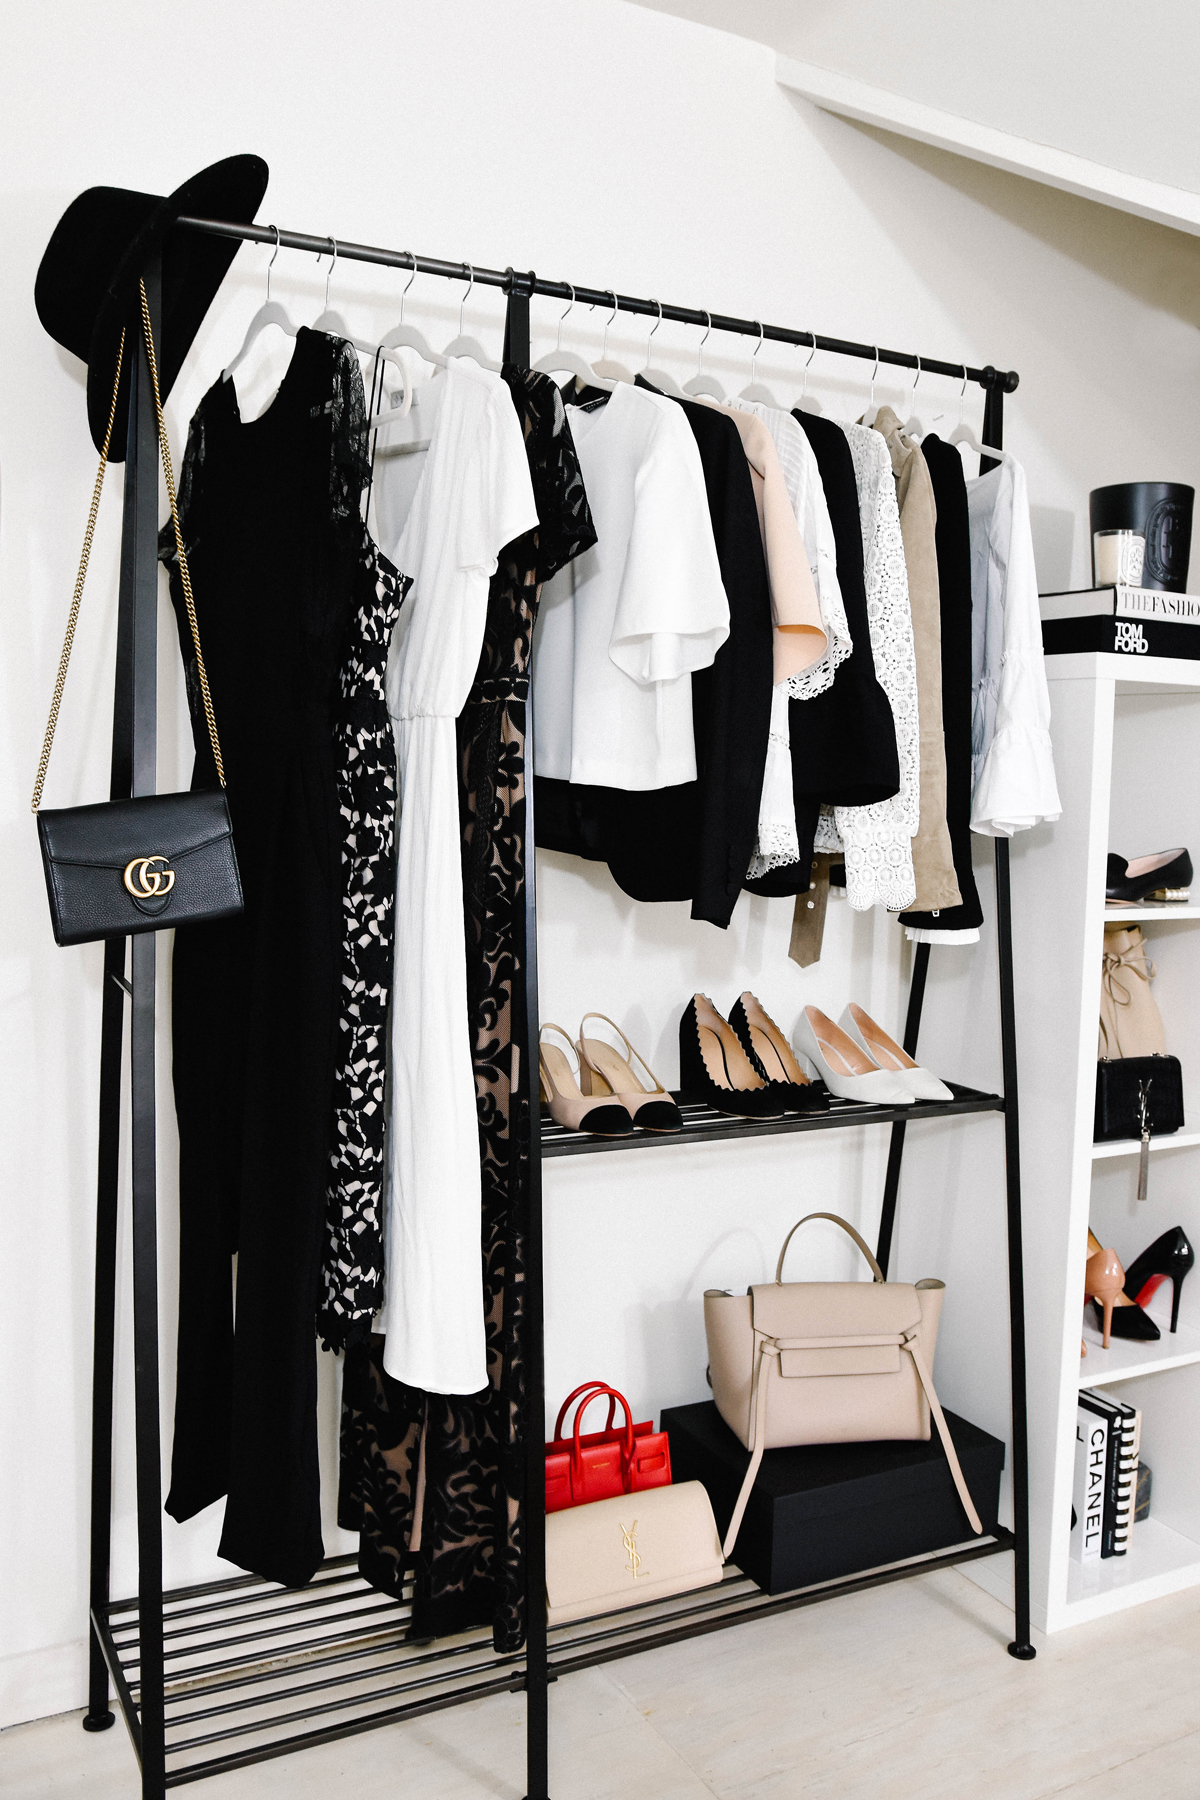 Fashion Jackson, Dallas Blogger, Home Office, Clothing Rack, How to Style a Clothing Rack, Ikea White Lacquer Shelves